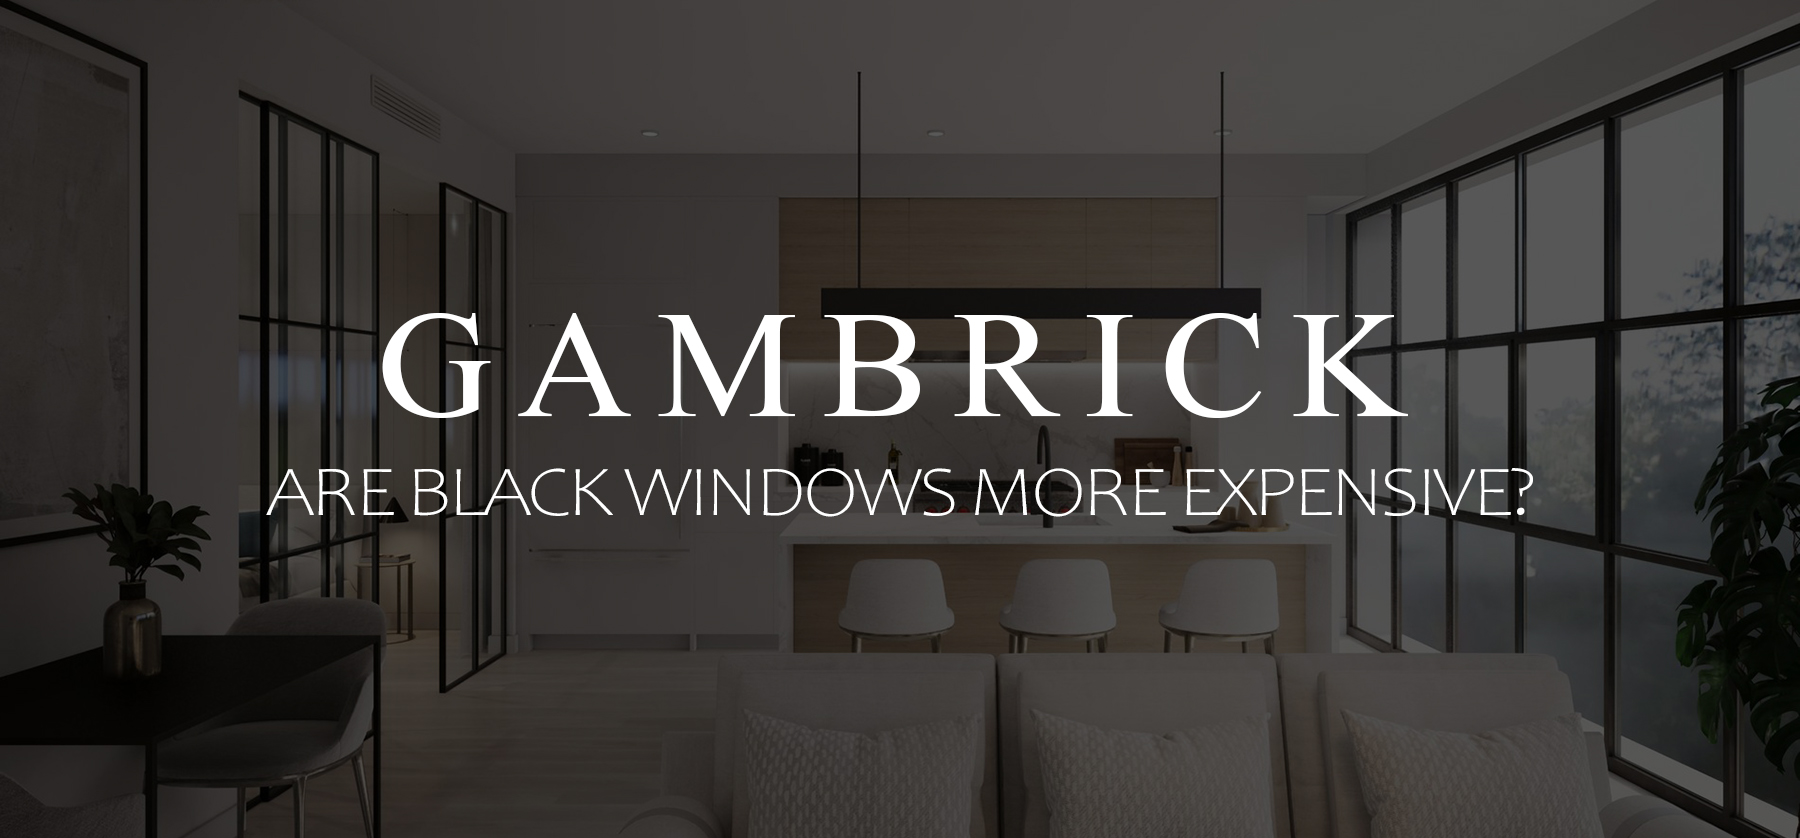 are black windows more expensive banner pic